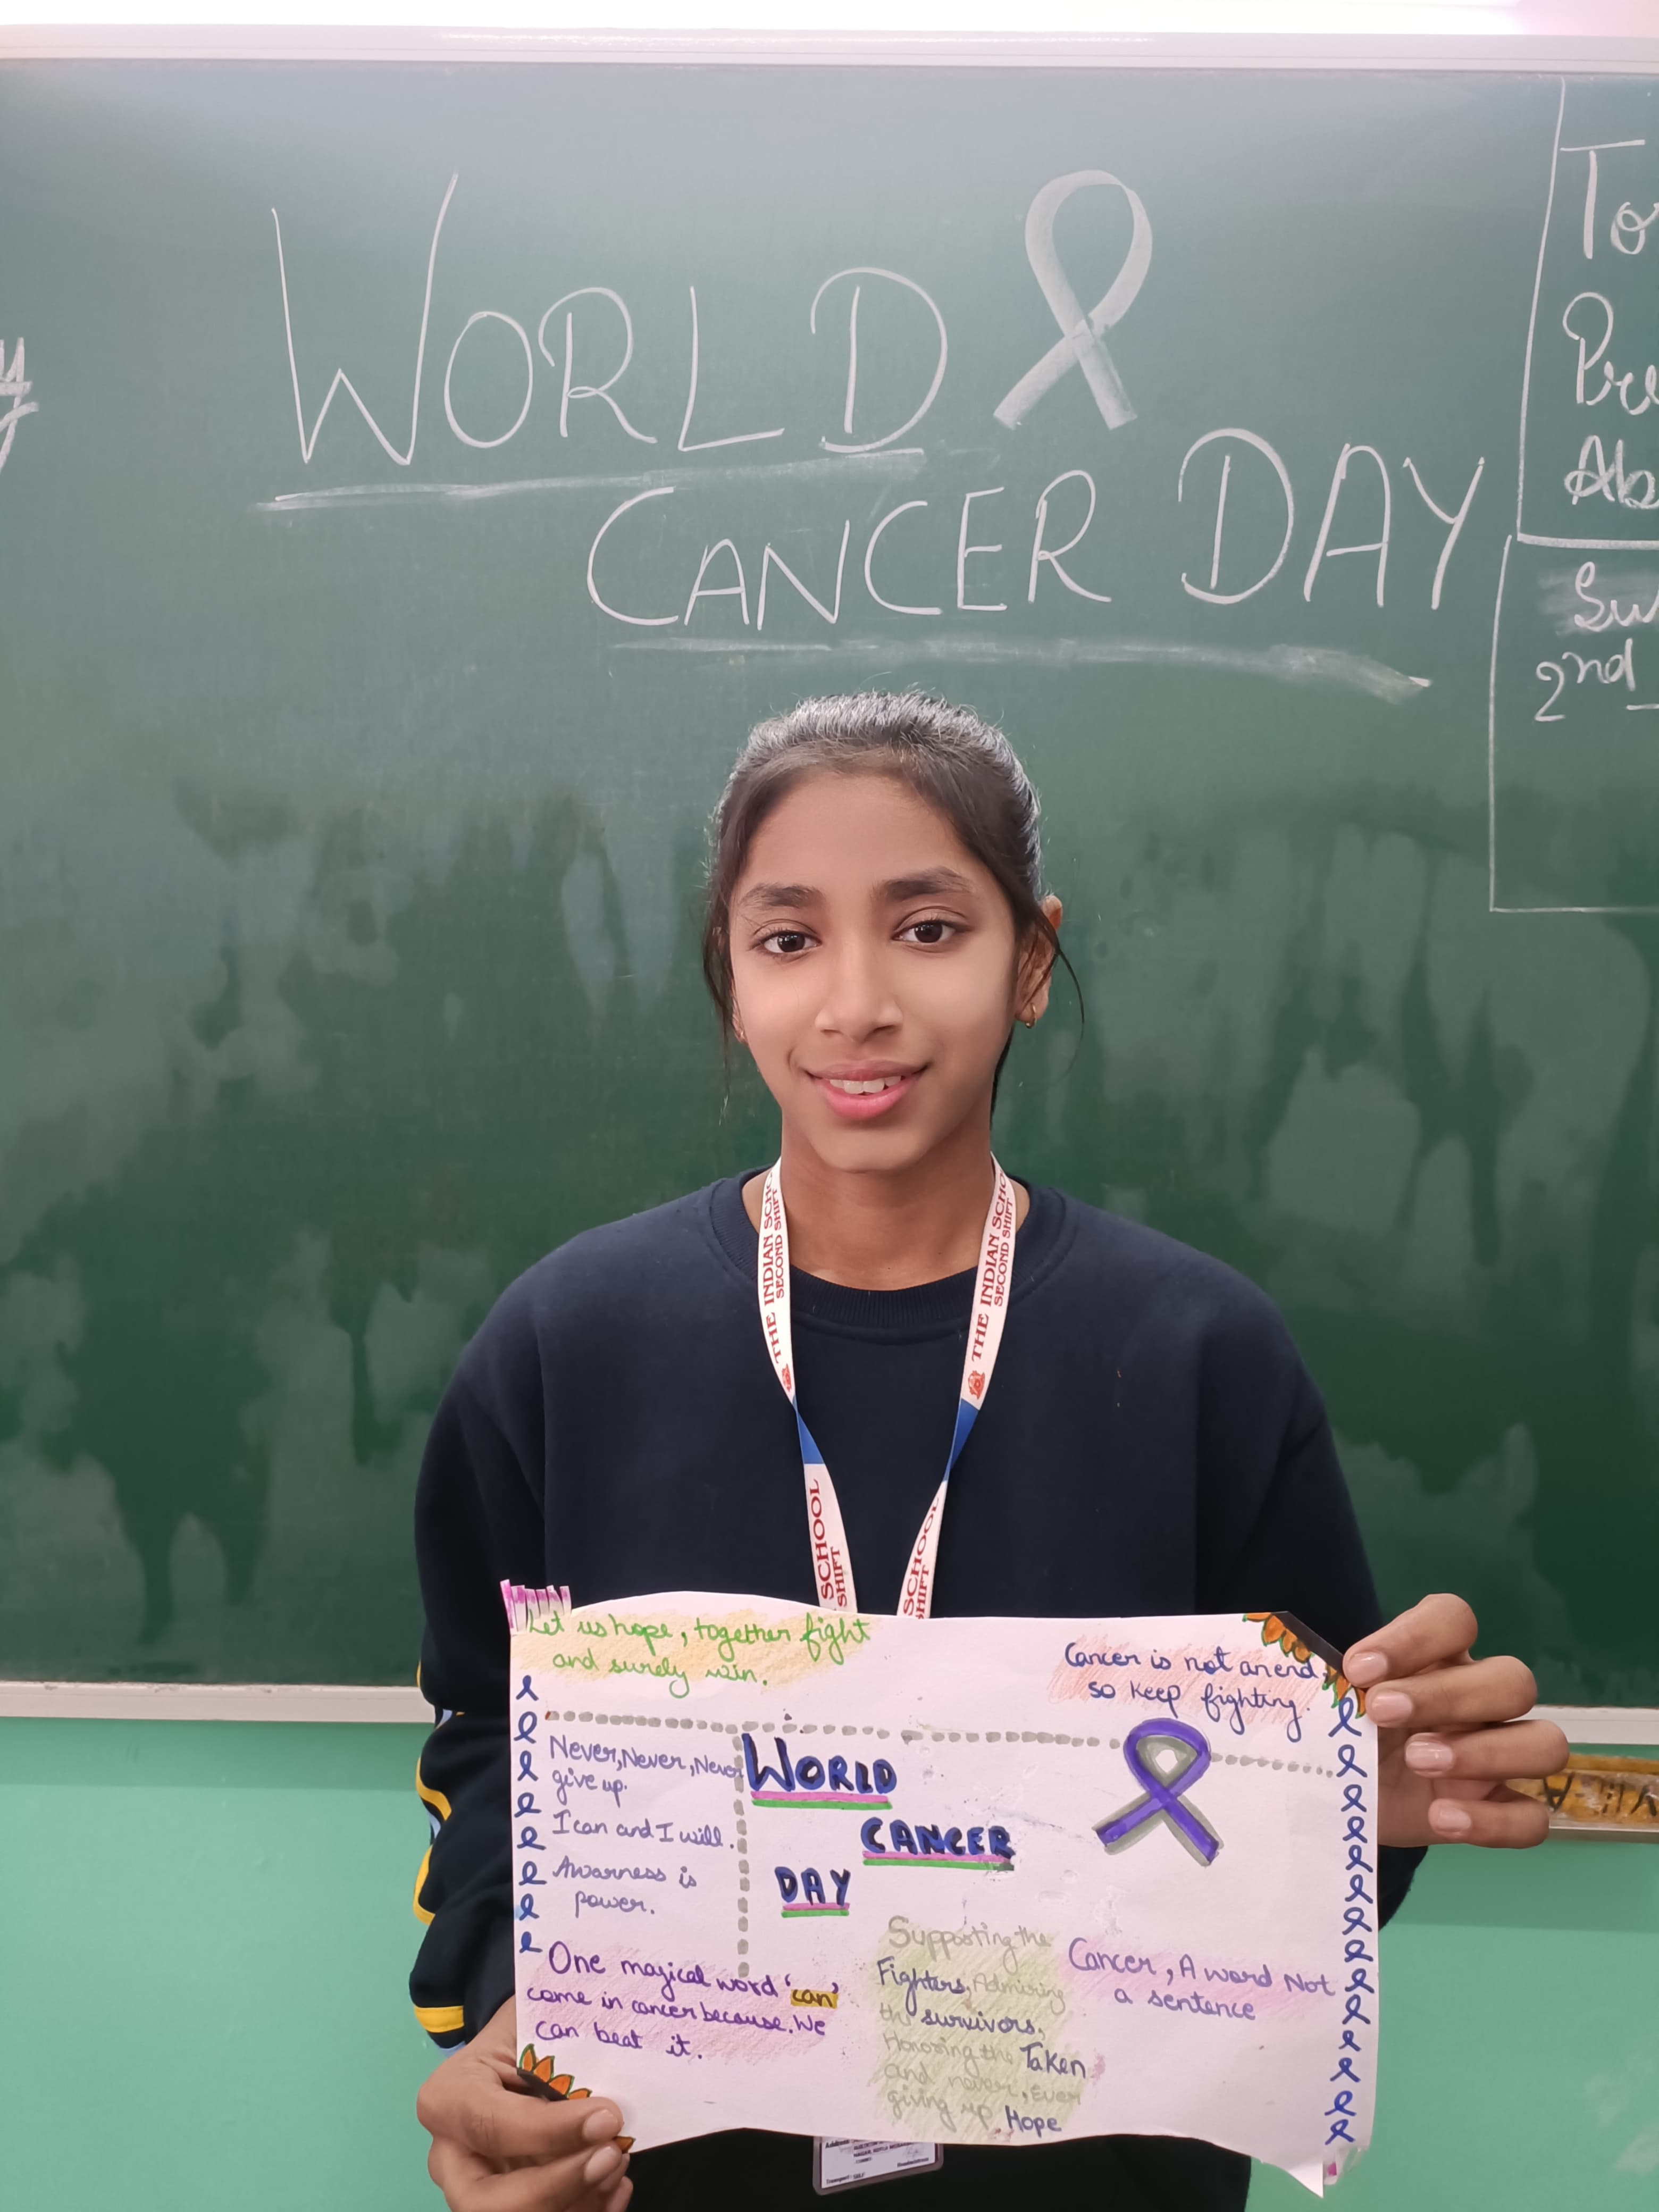 Classes 6-9 observe World Cancer Day